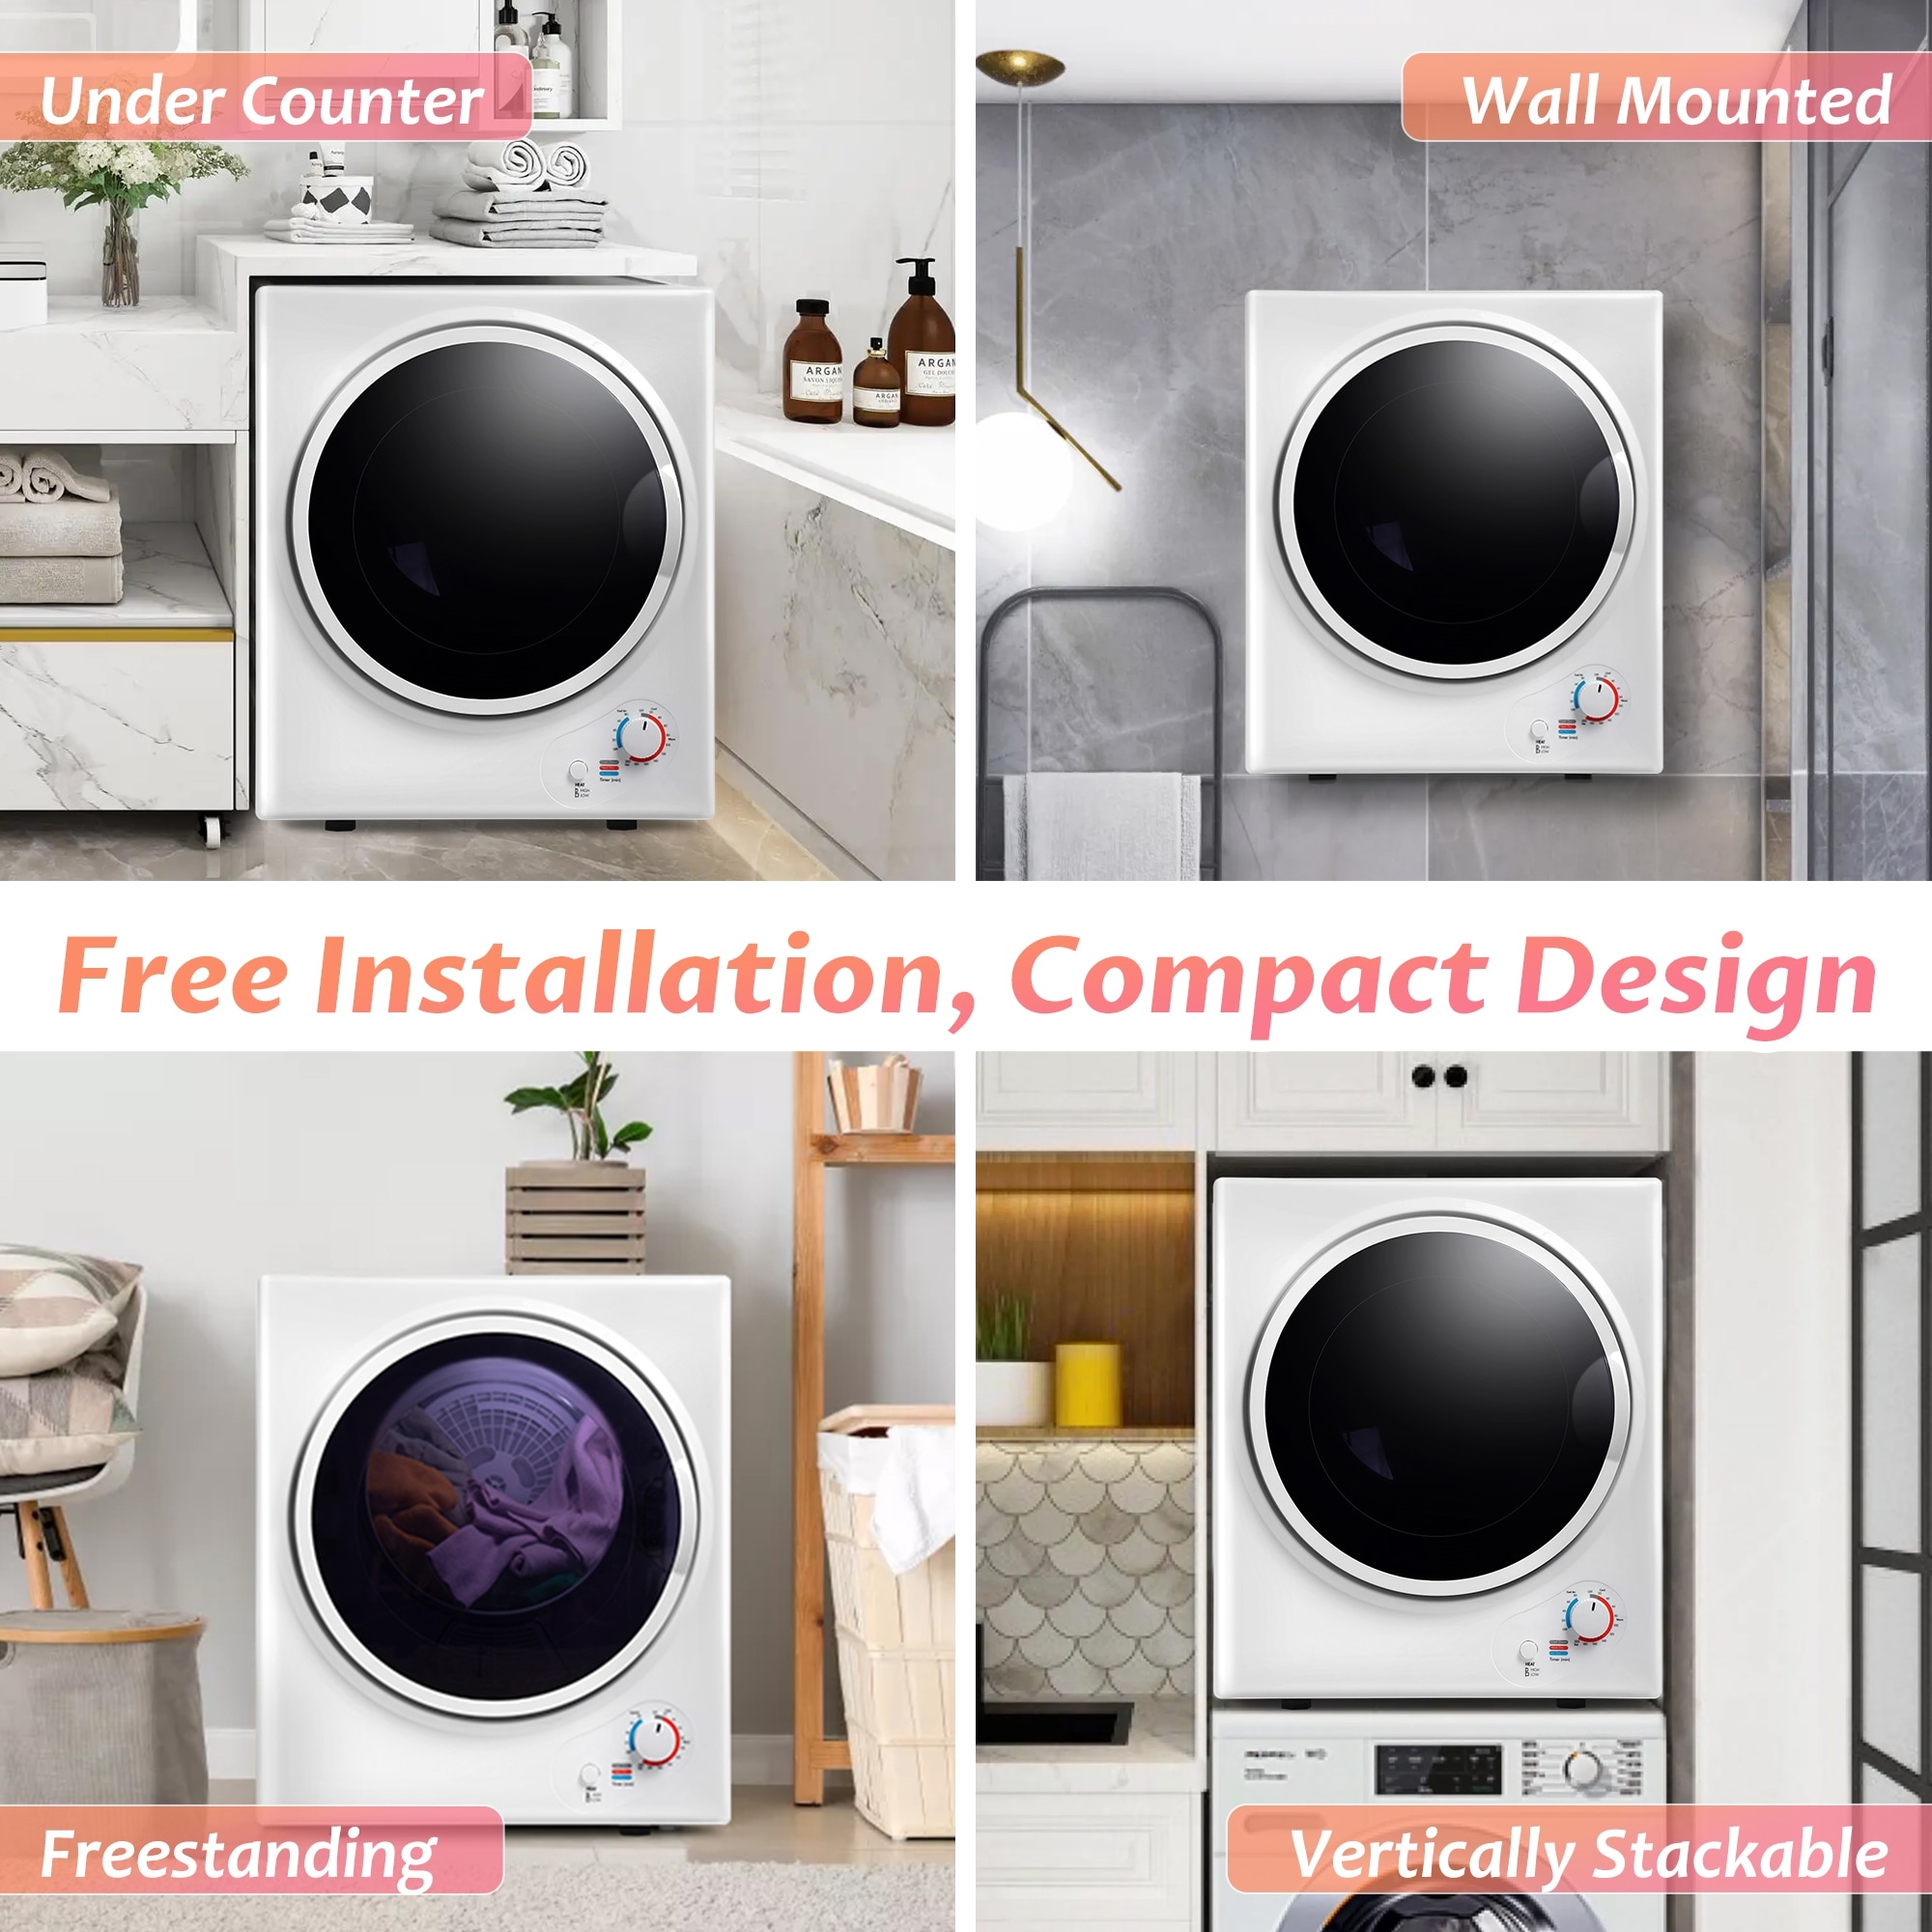 Electric Portable Clothes Dryer, Laundry Dryer for Apartments - On